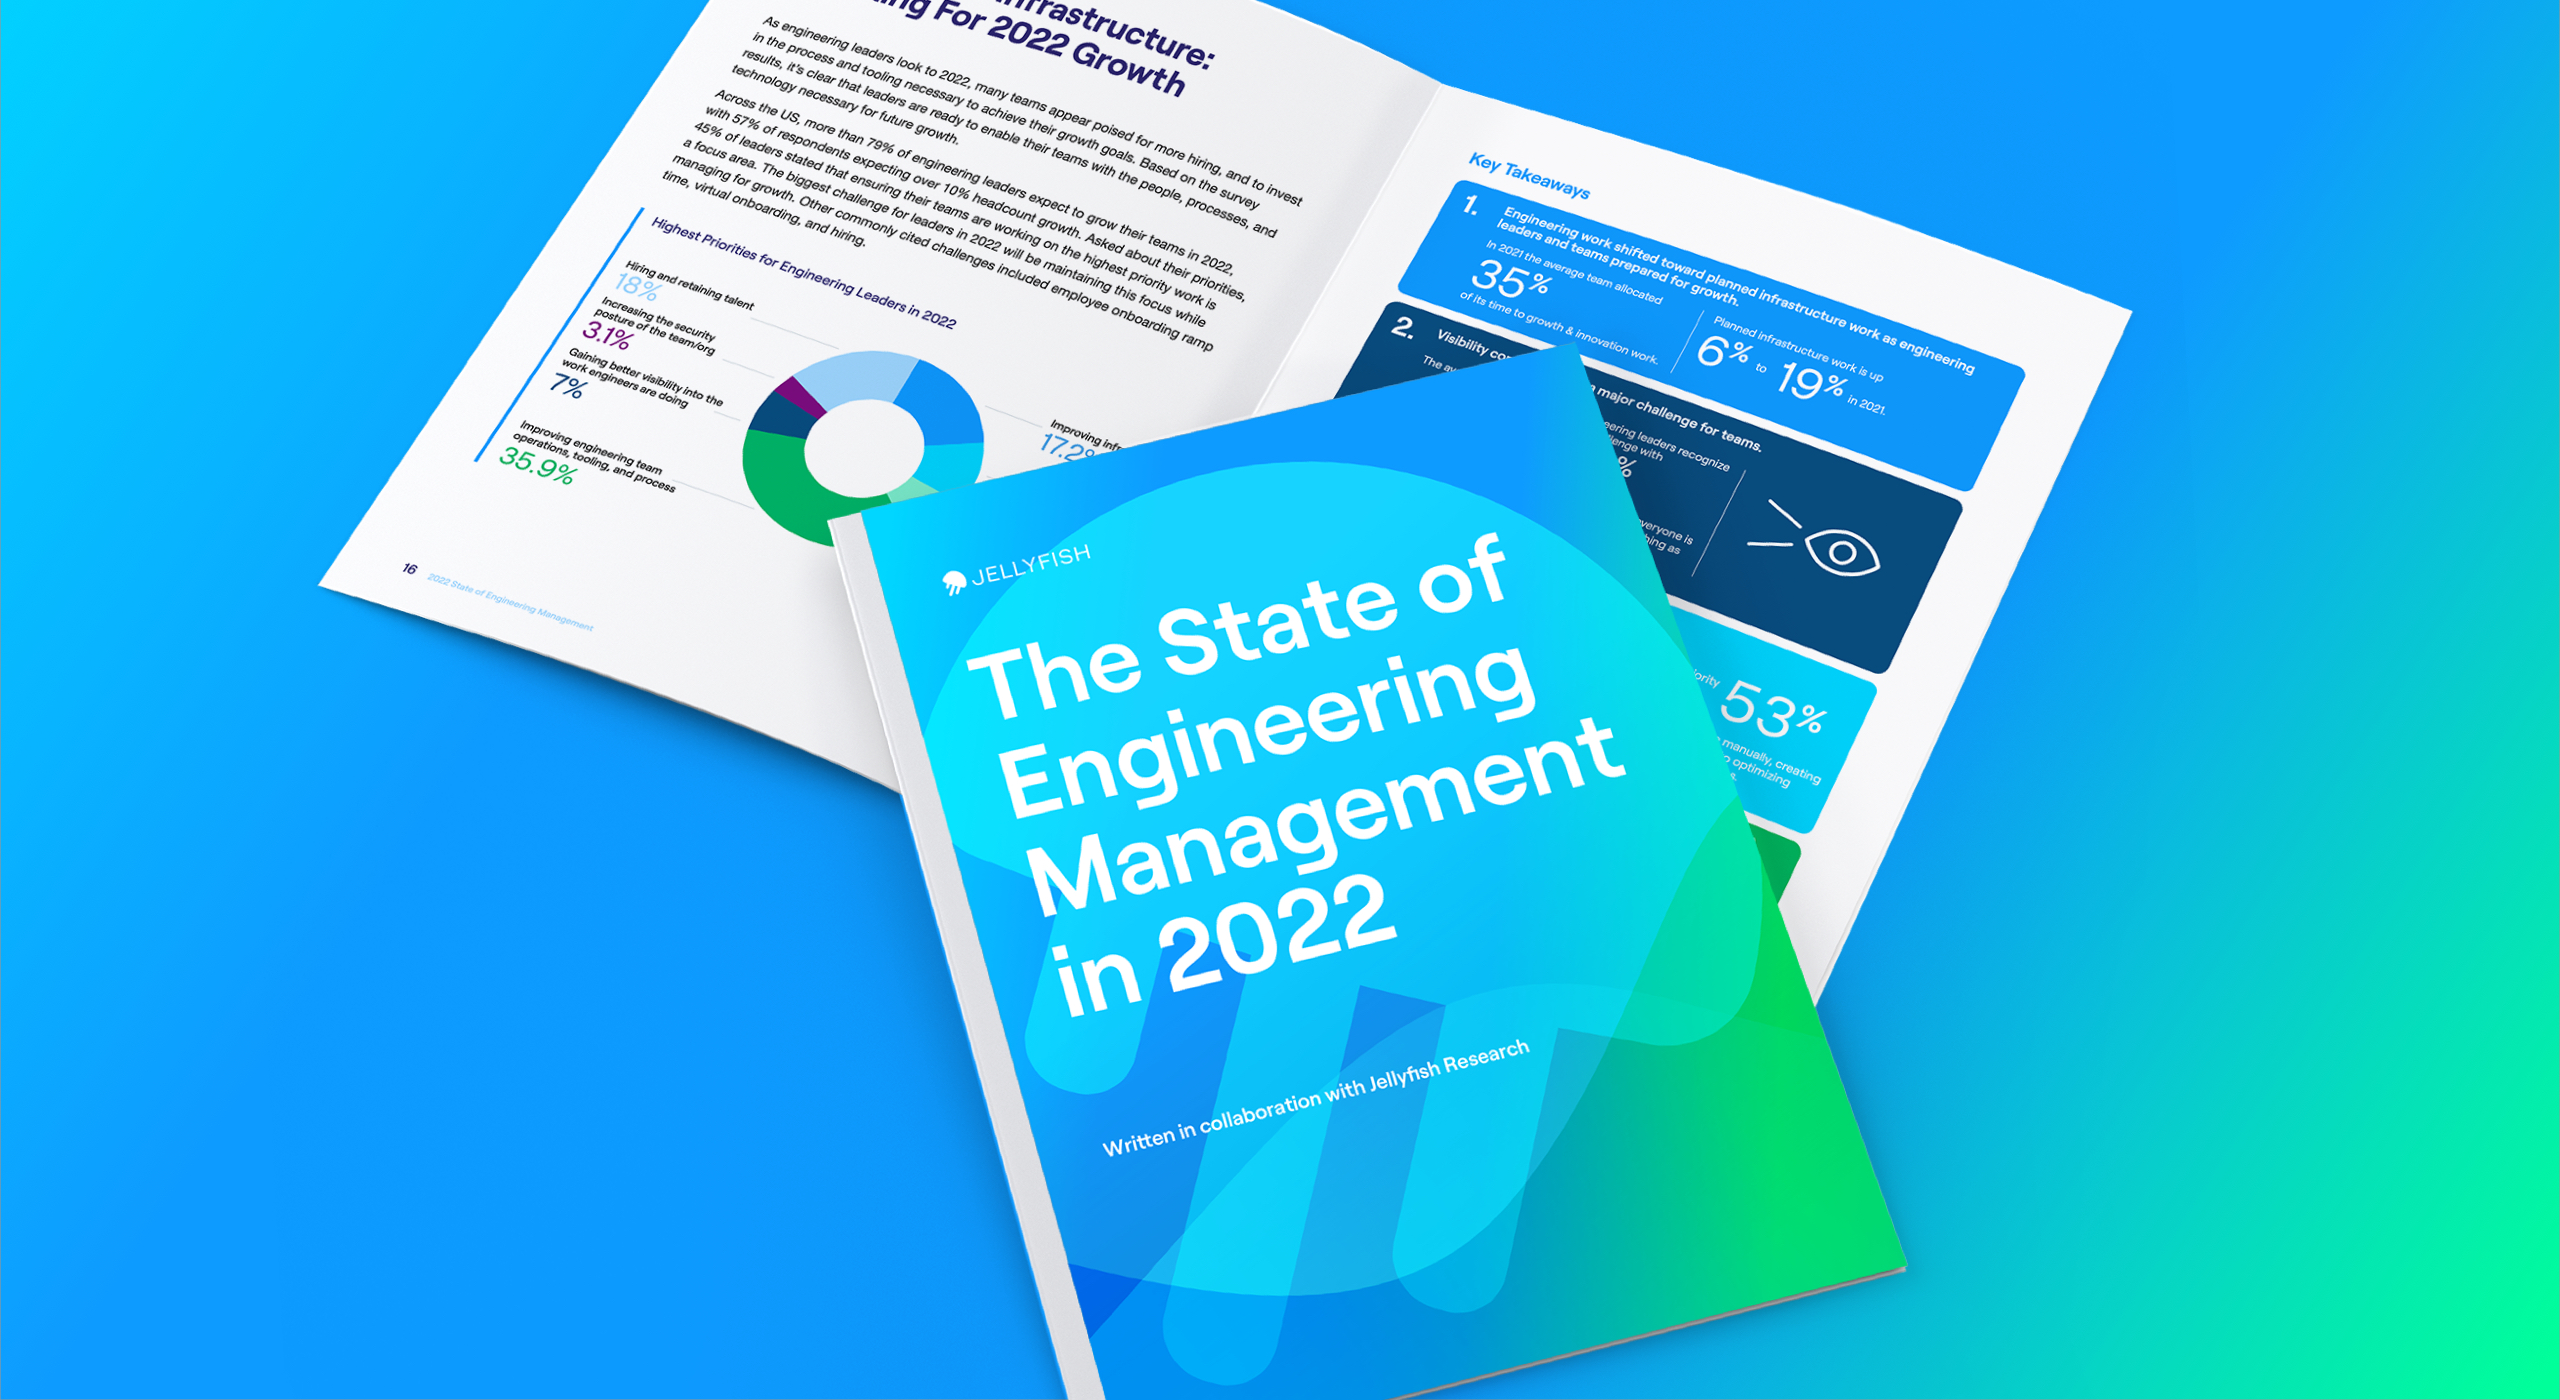 The 2022 State of Engineering Management